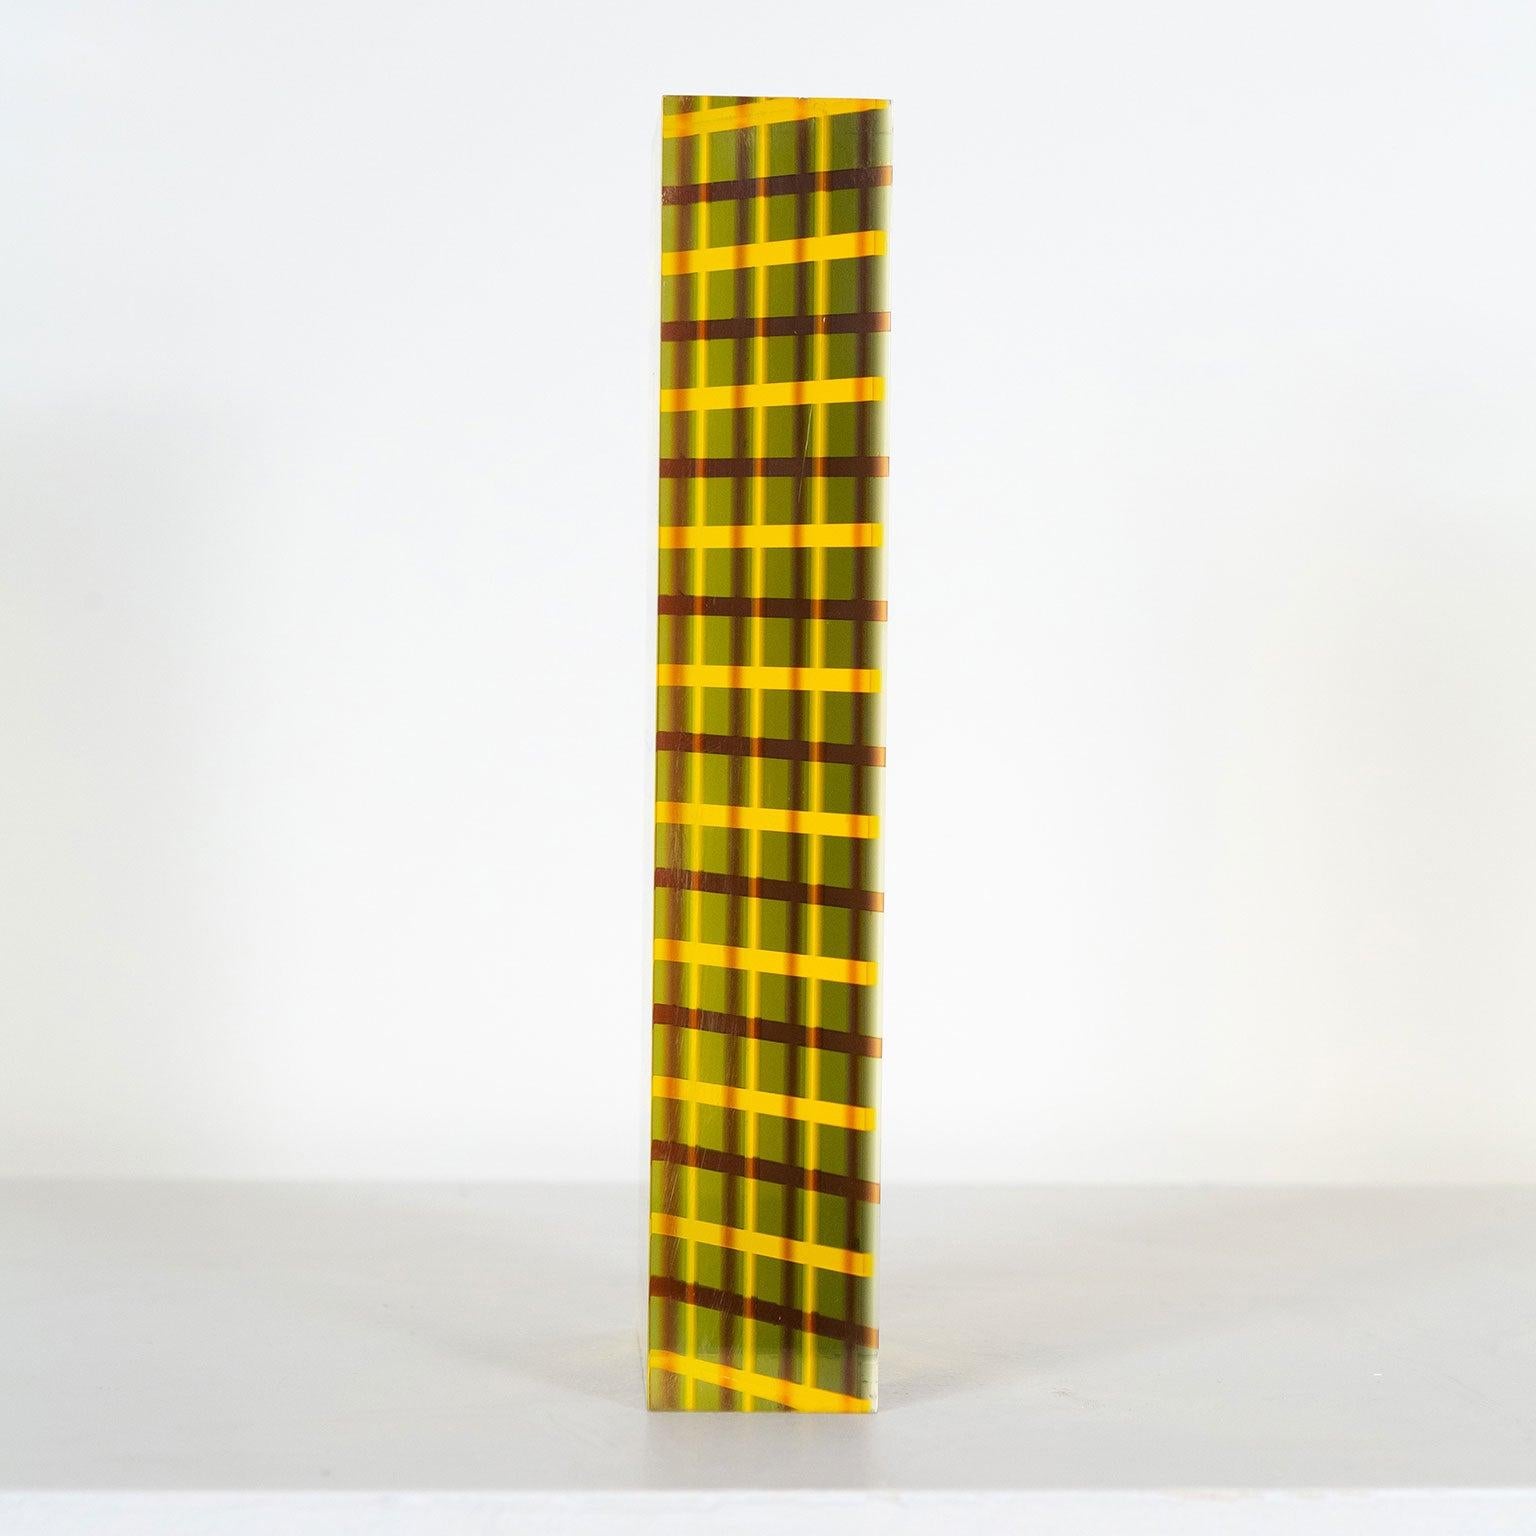 Electric Plaid - Contemporary Sculpture by Vasa Velizar Mihich